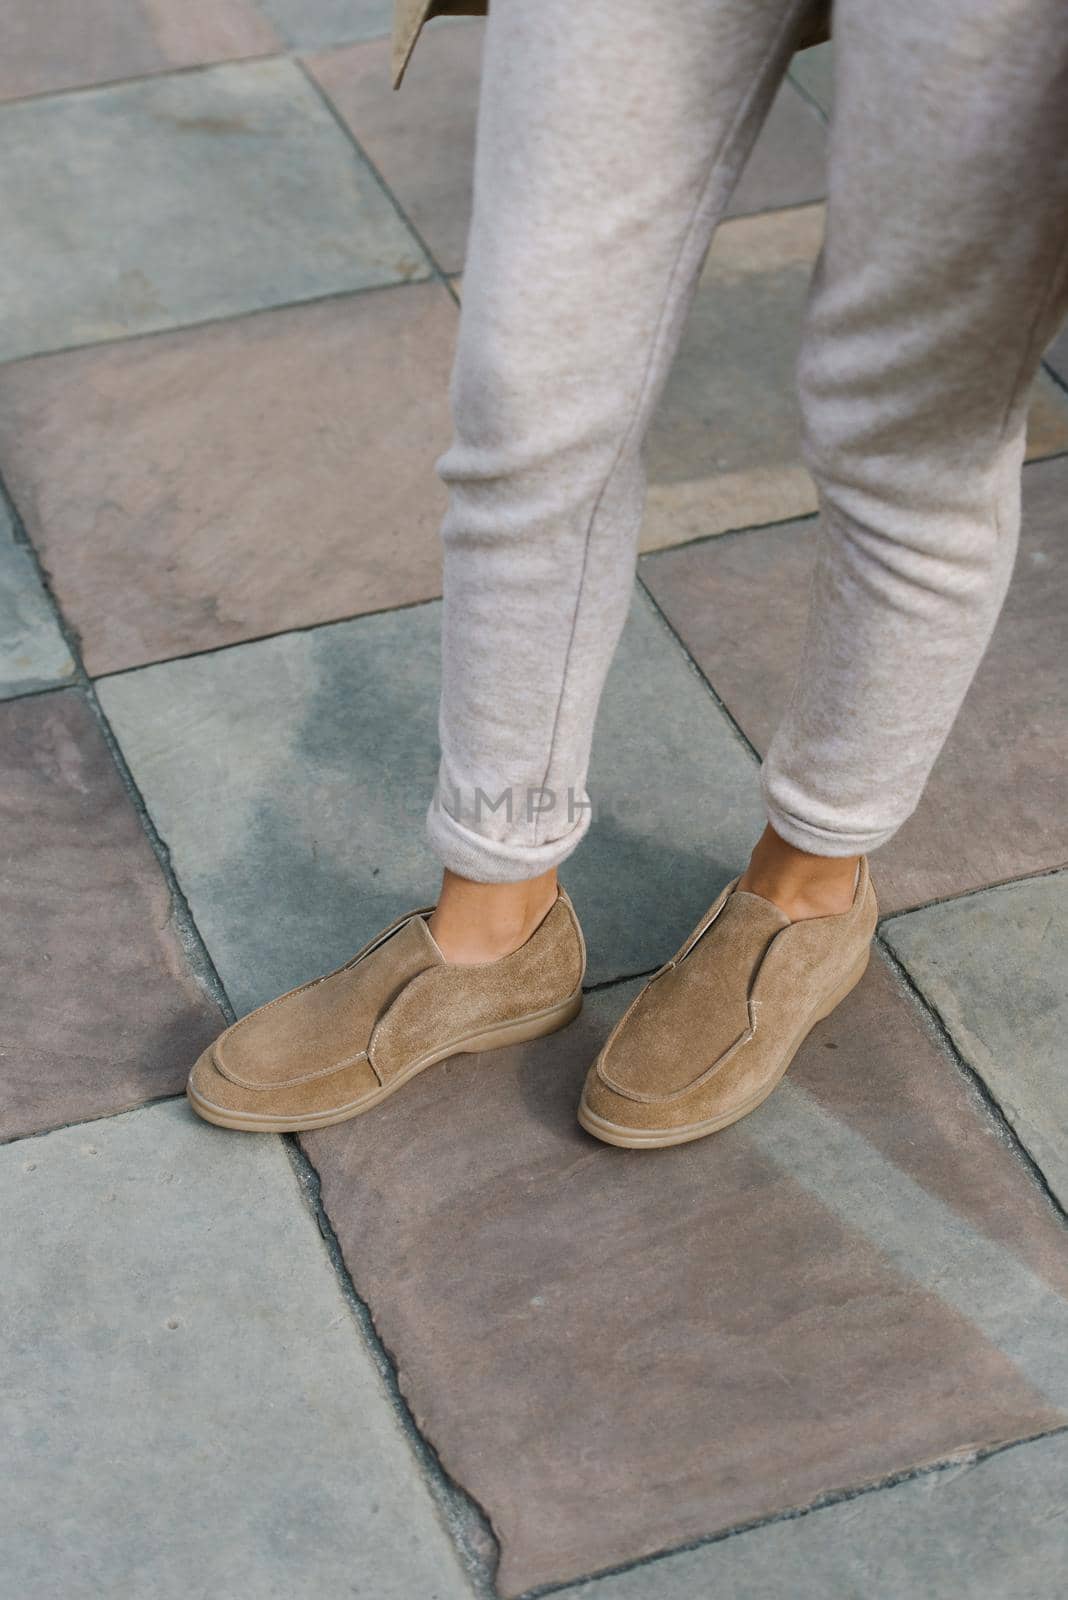 Portrait of fashionable women in beige pants and stylish suede loafer shoes posing in the street. Stone tiles